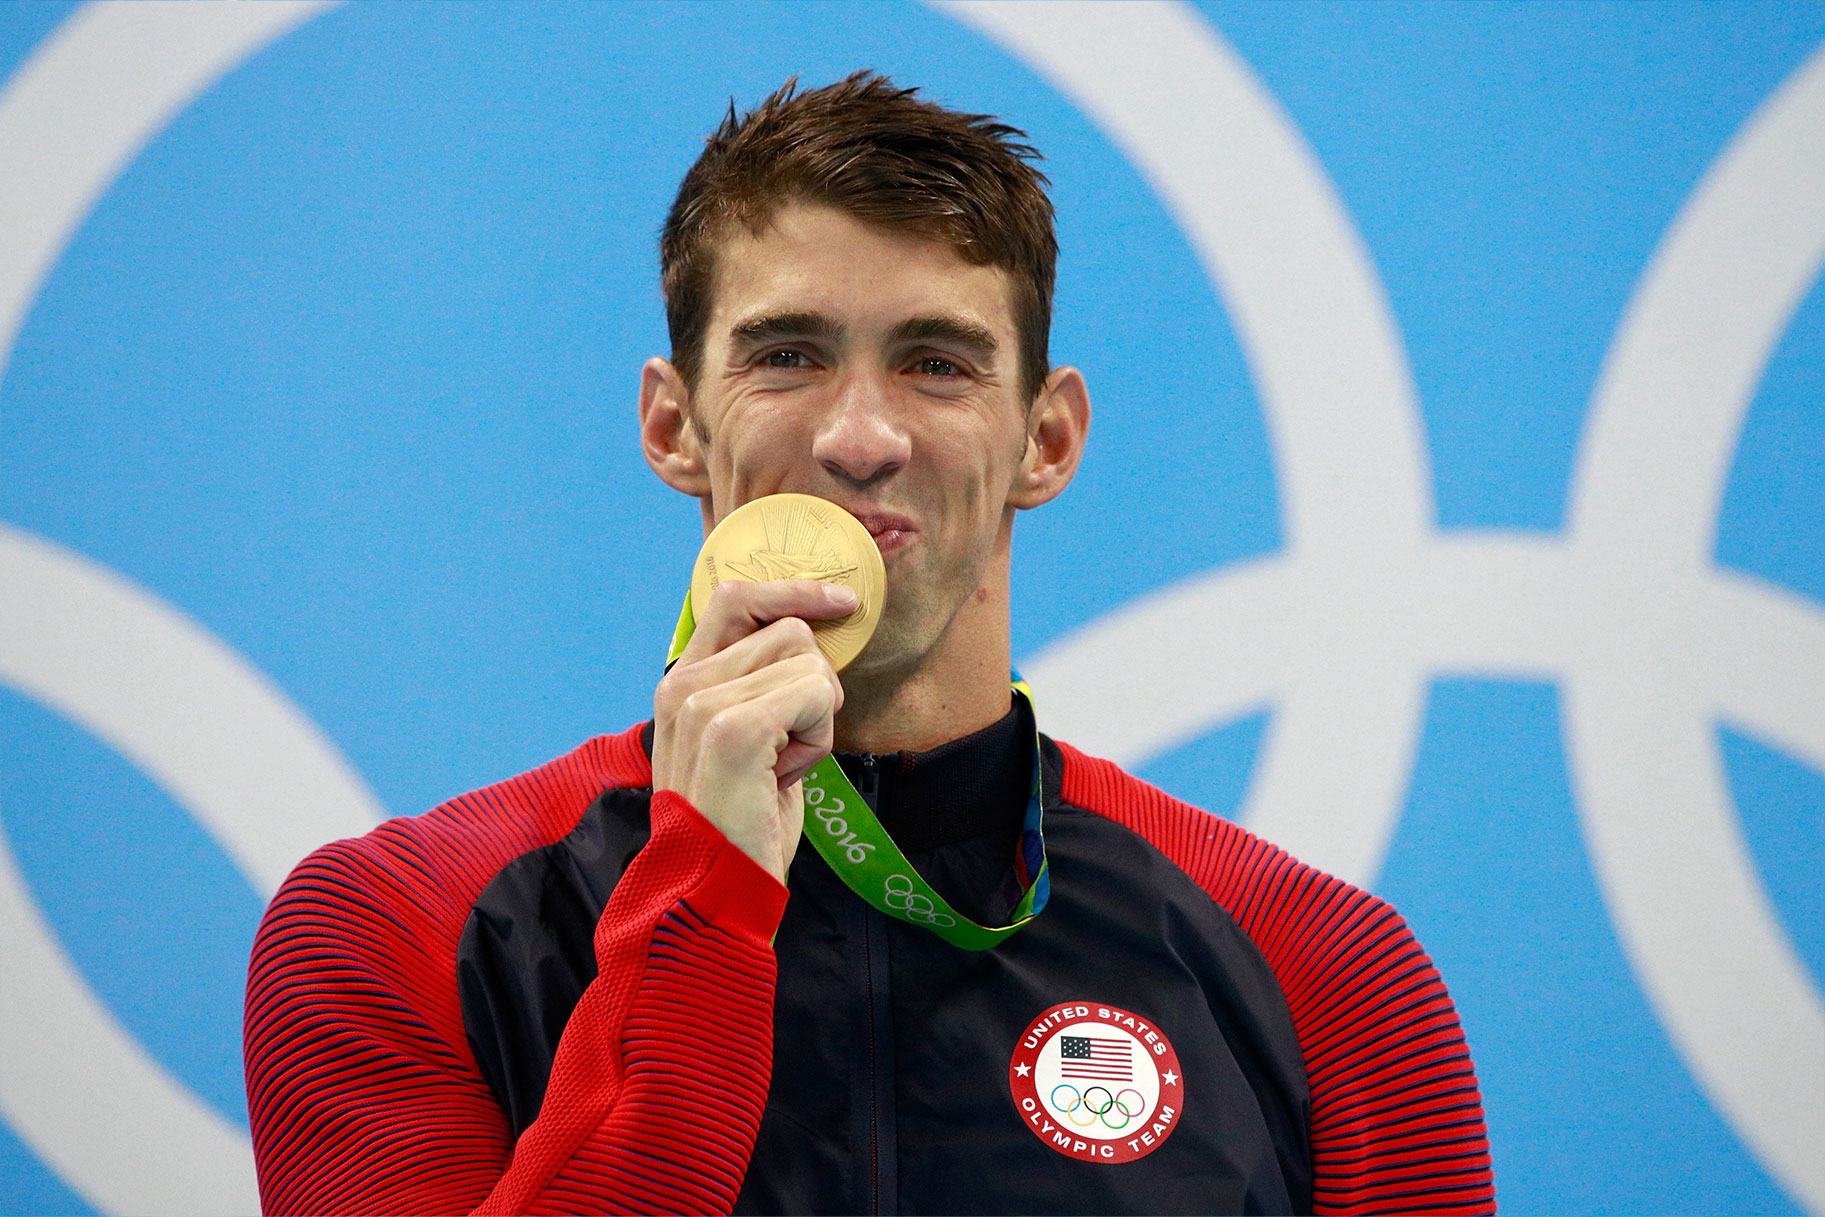 The Most Olympic Medals Won: Michael Phelps' 28 Golds